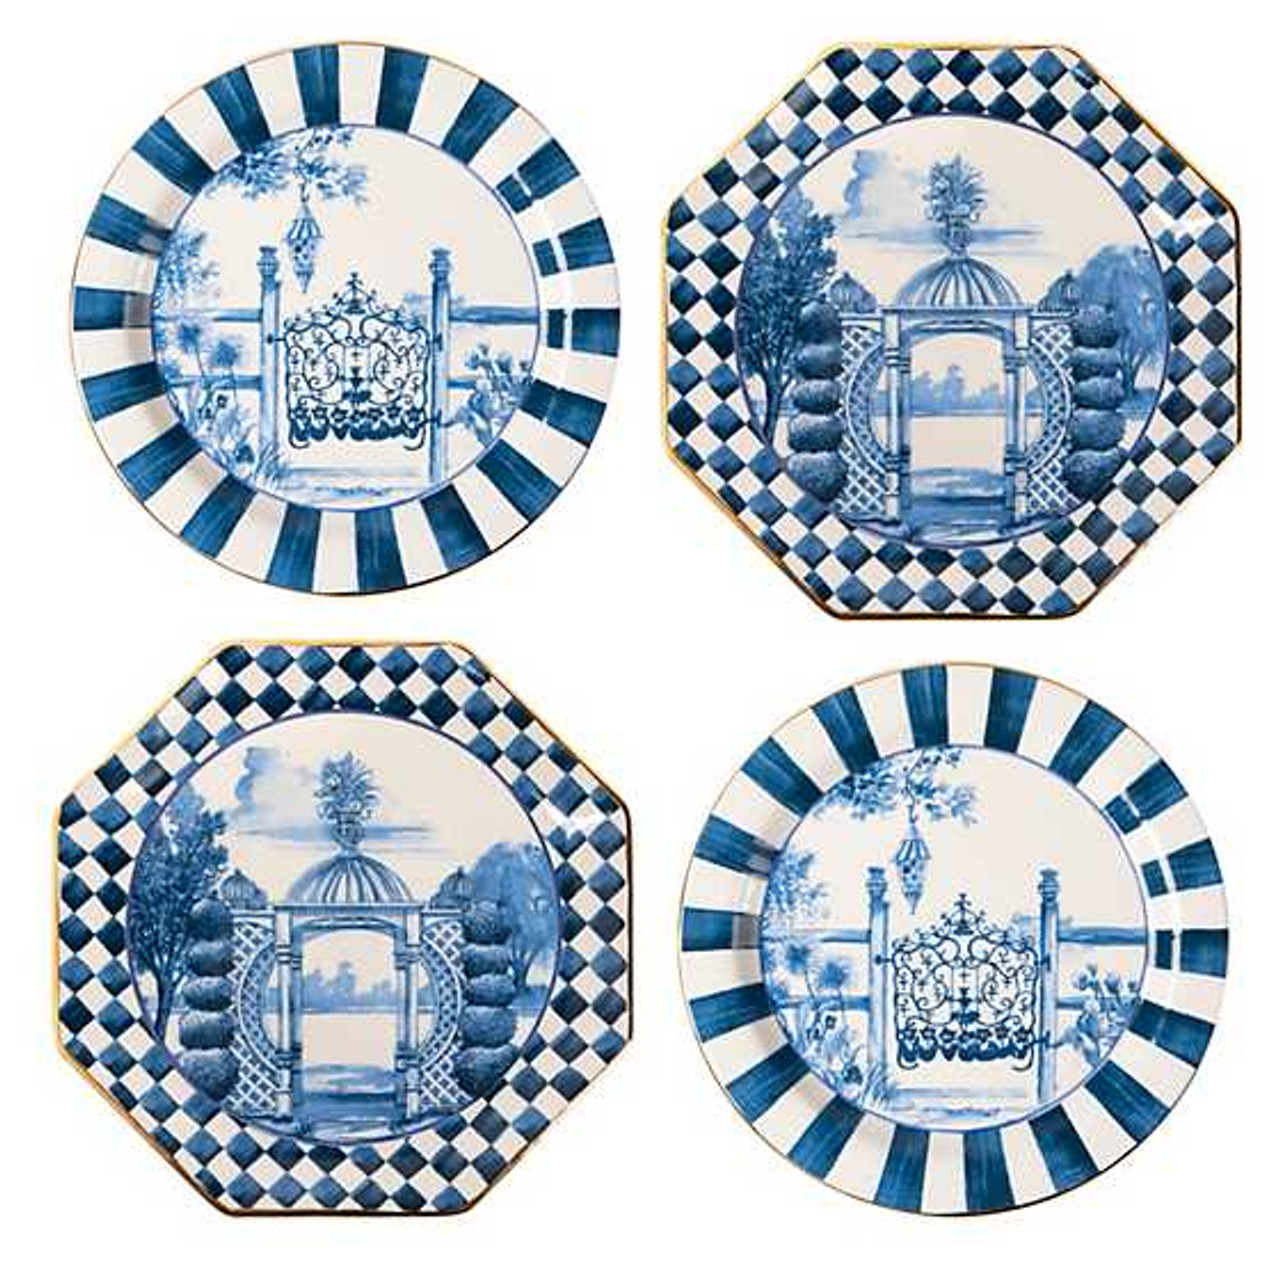 English Pottery Black and White Toile Plates